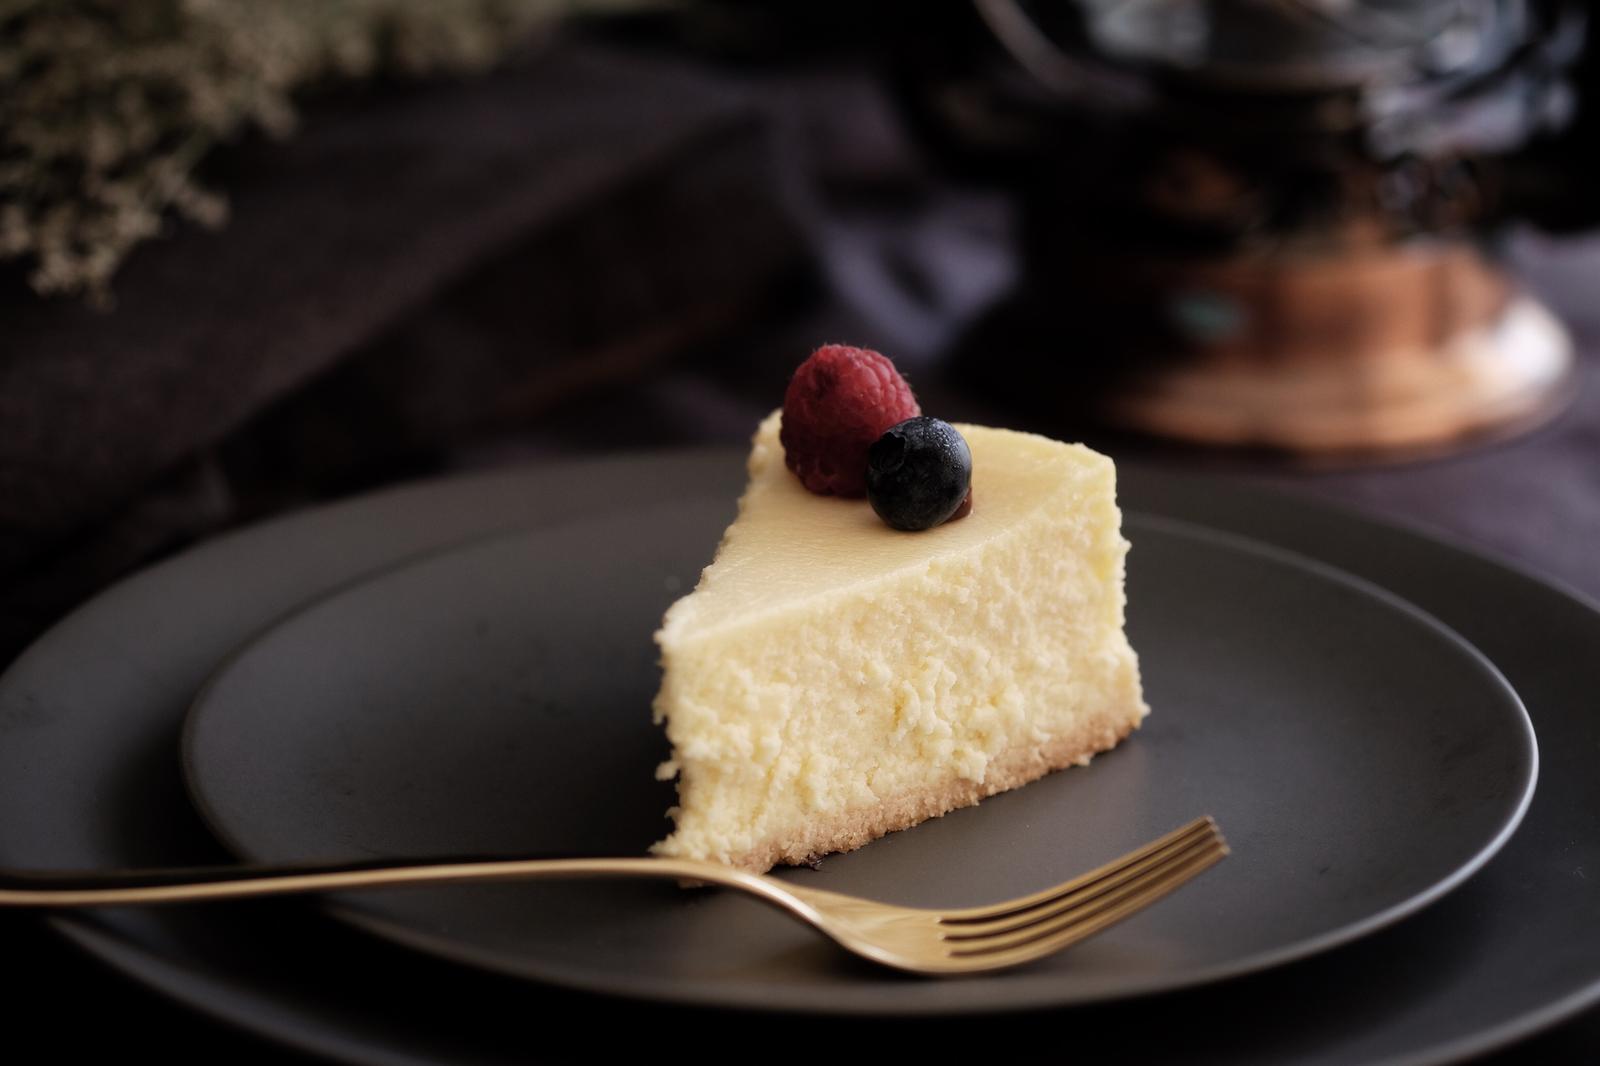 This 25-Question General Knowledge Quiz Will Determine If You Know a Little or a Lot Cheesecake